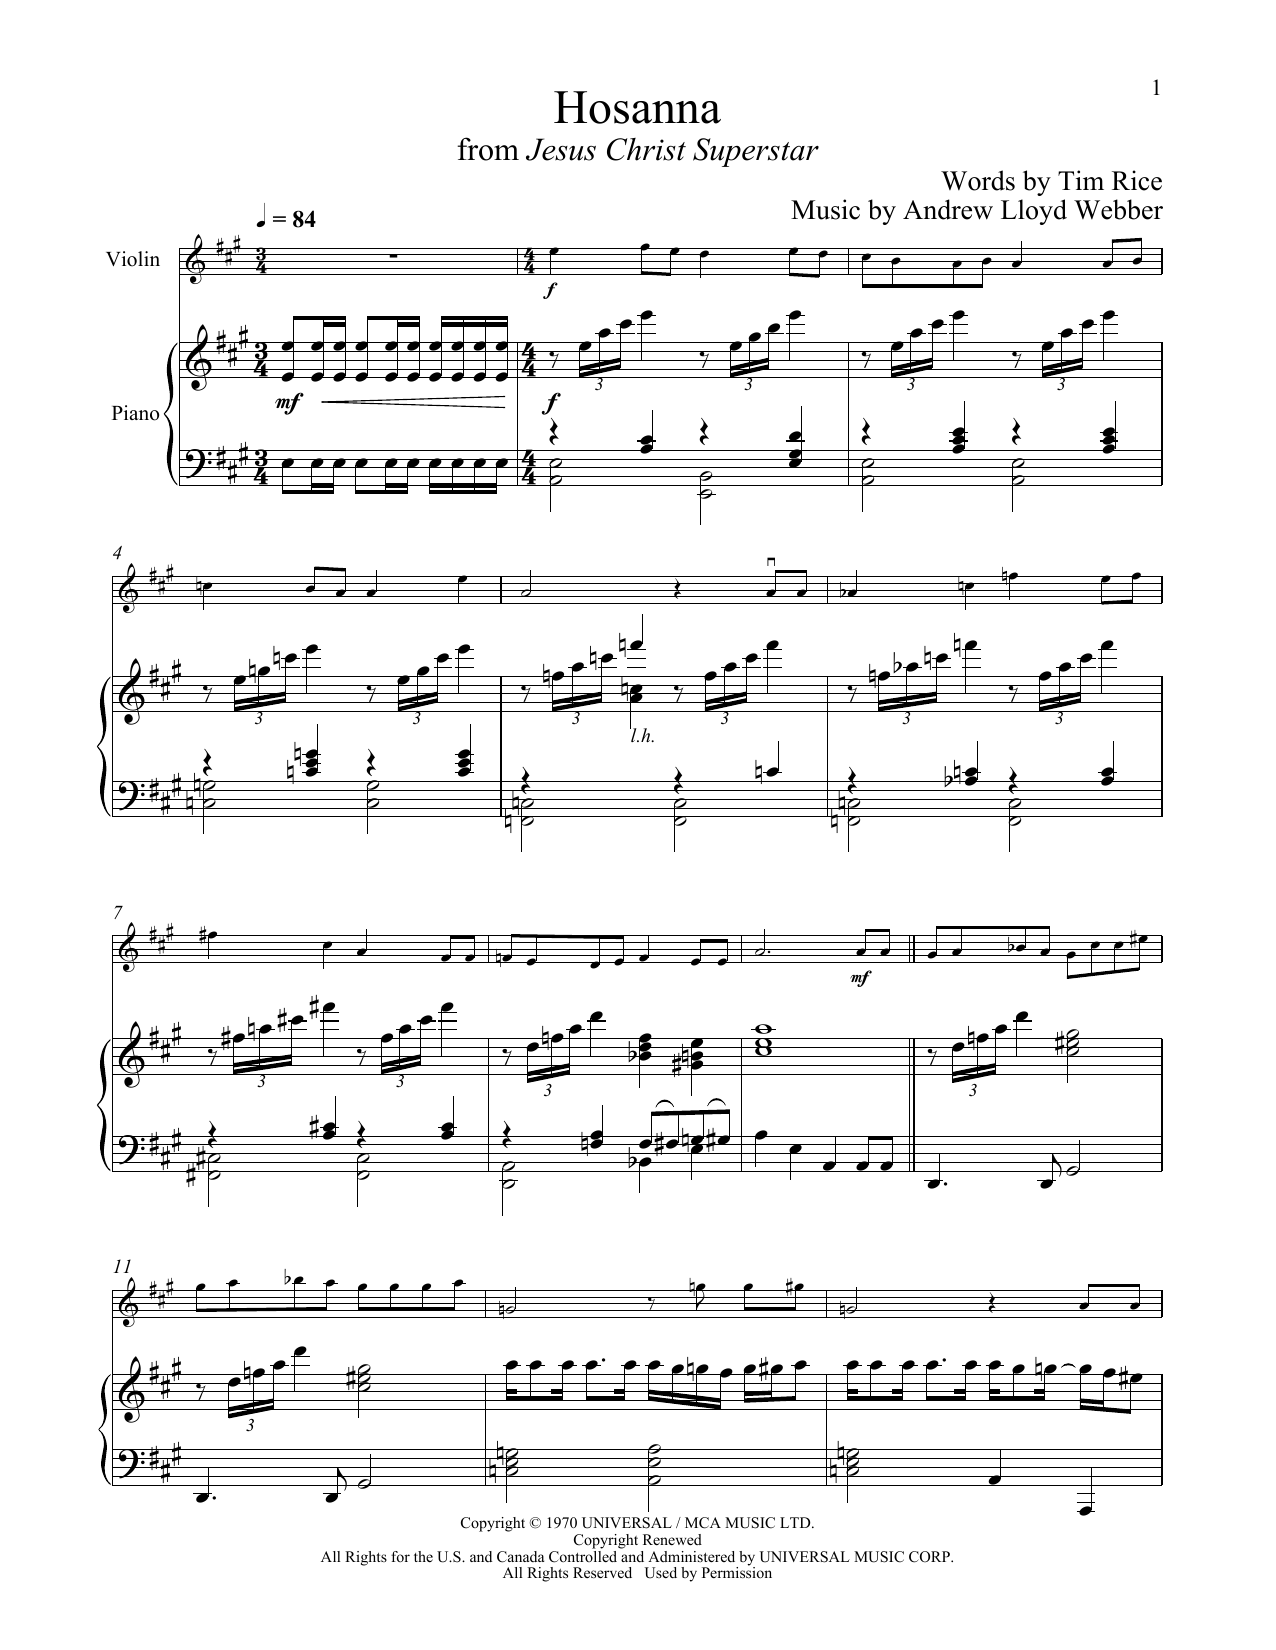 Andrew Lloyd Webber Hosanna (from Jesus Christ Superstar) sheet music notes and chords. Download Printable PDF.